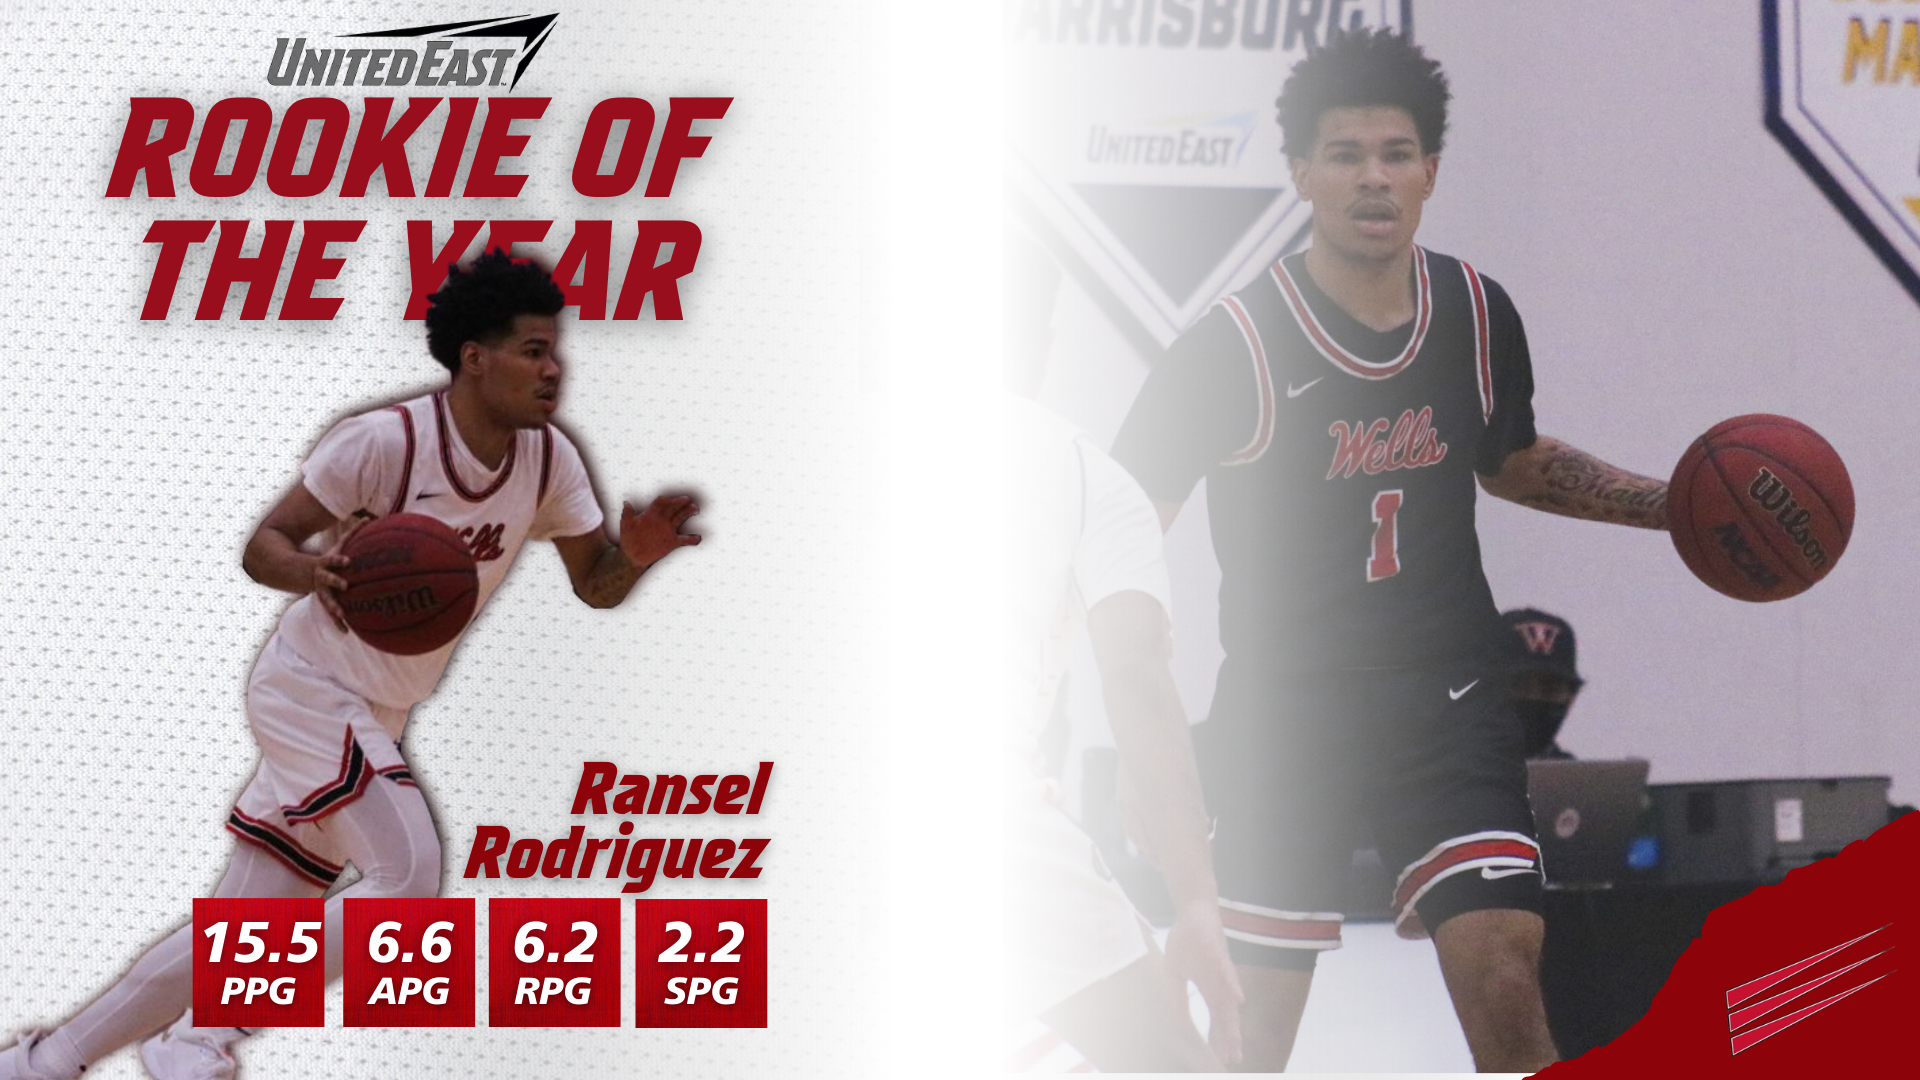 Rodriguez named Rookie of The Year